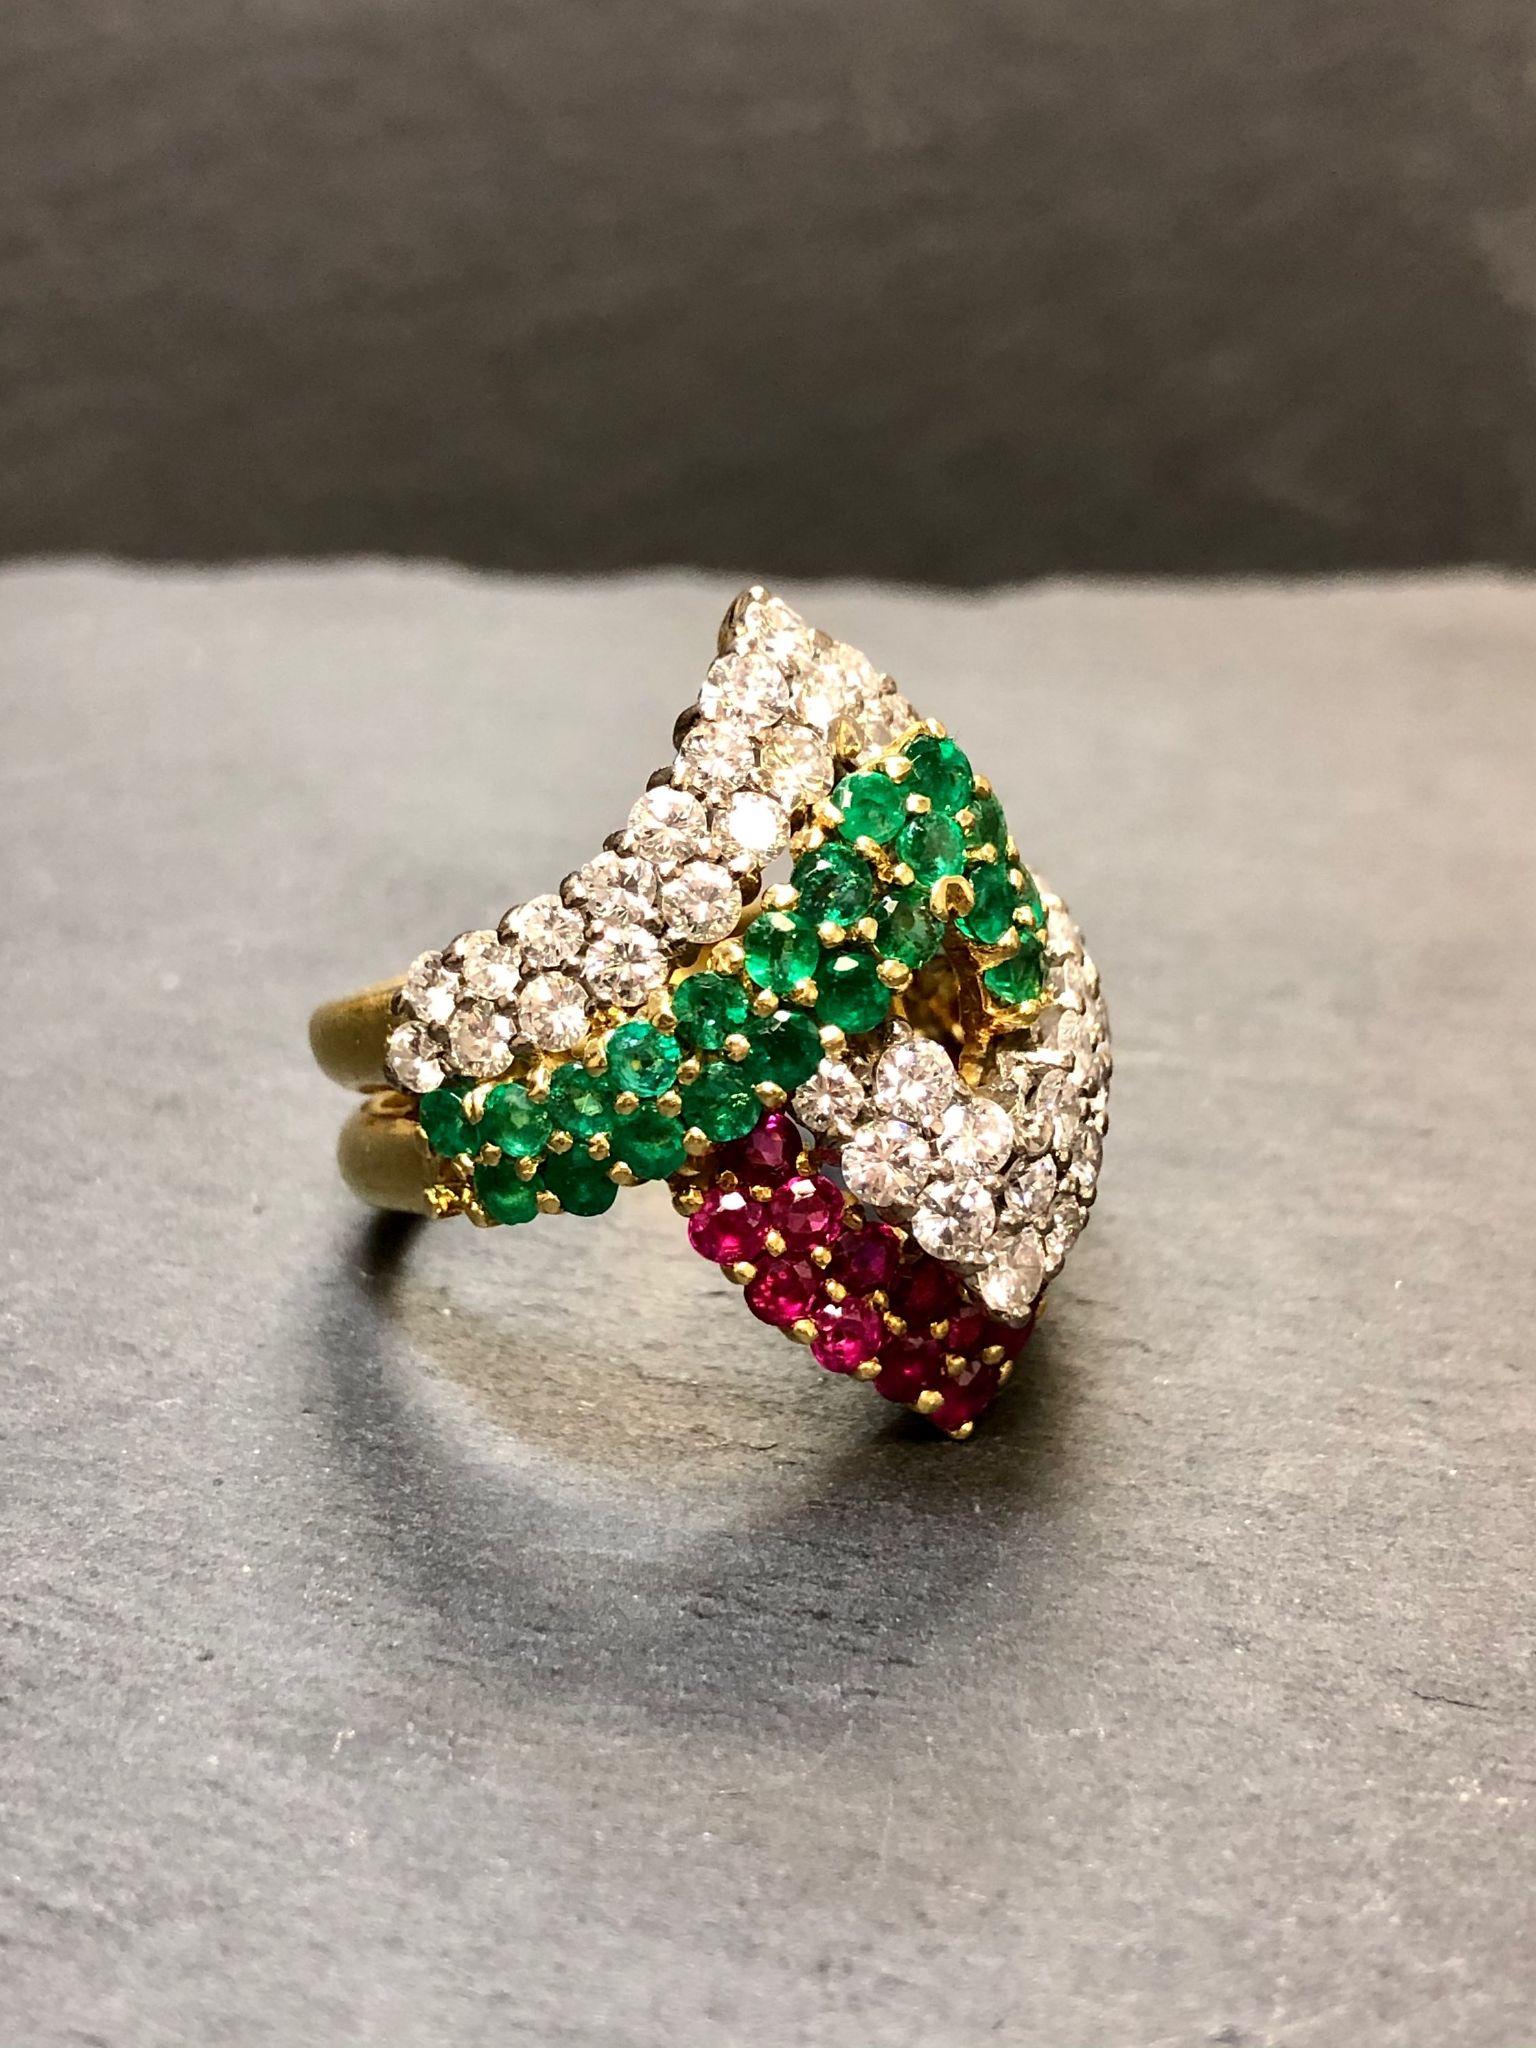 
Italian made 18K chevron ring set with approximately 2.10cttw in G-H color Vs clarity rounds diamonds, 1.68cttw in natural rubies and 1.10cttw in natural emeralds.

Condition
All stones are secure. In very wearable